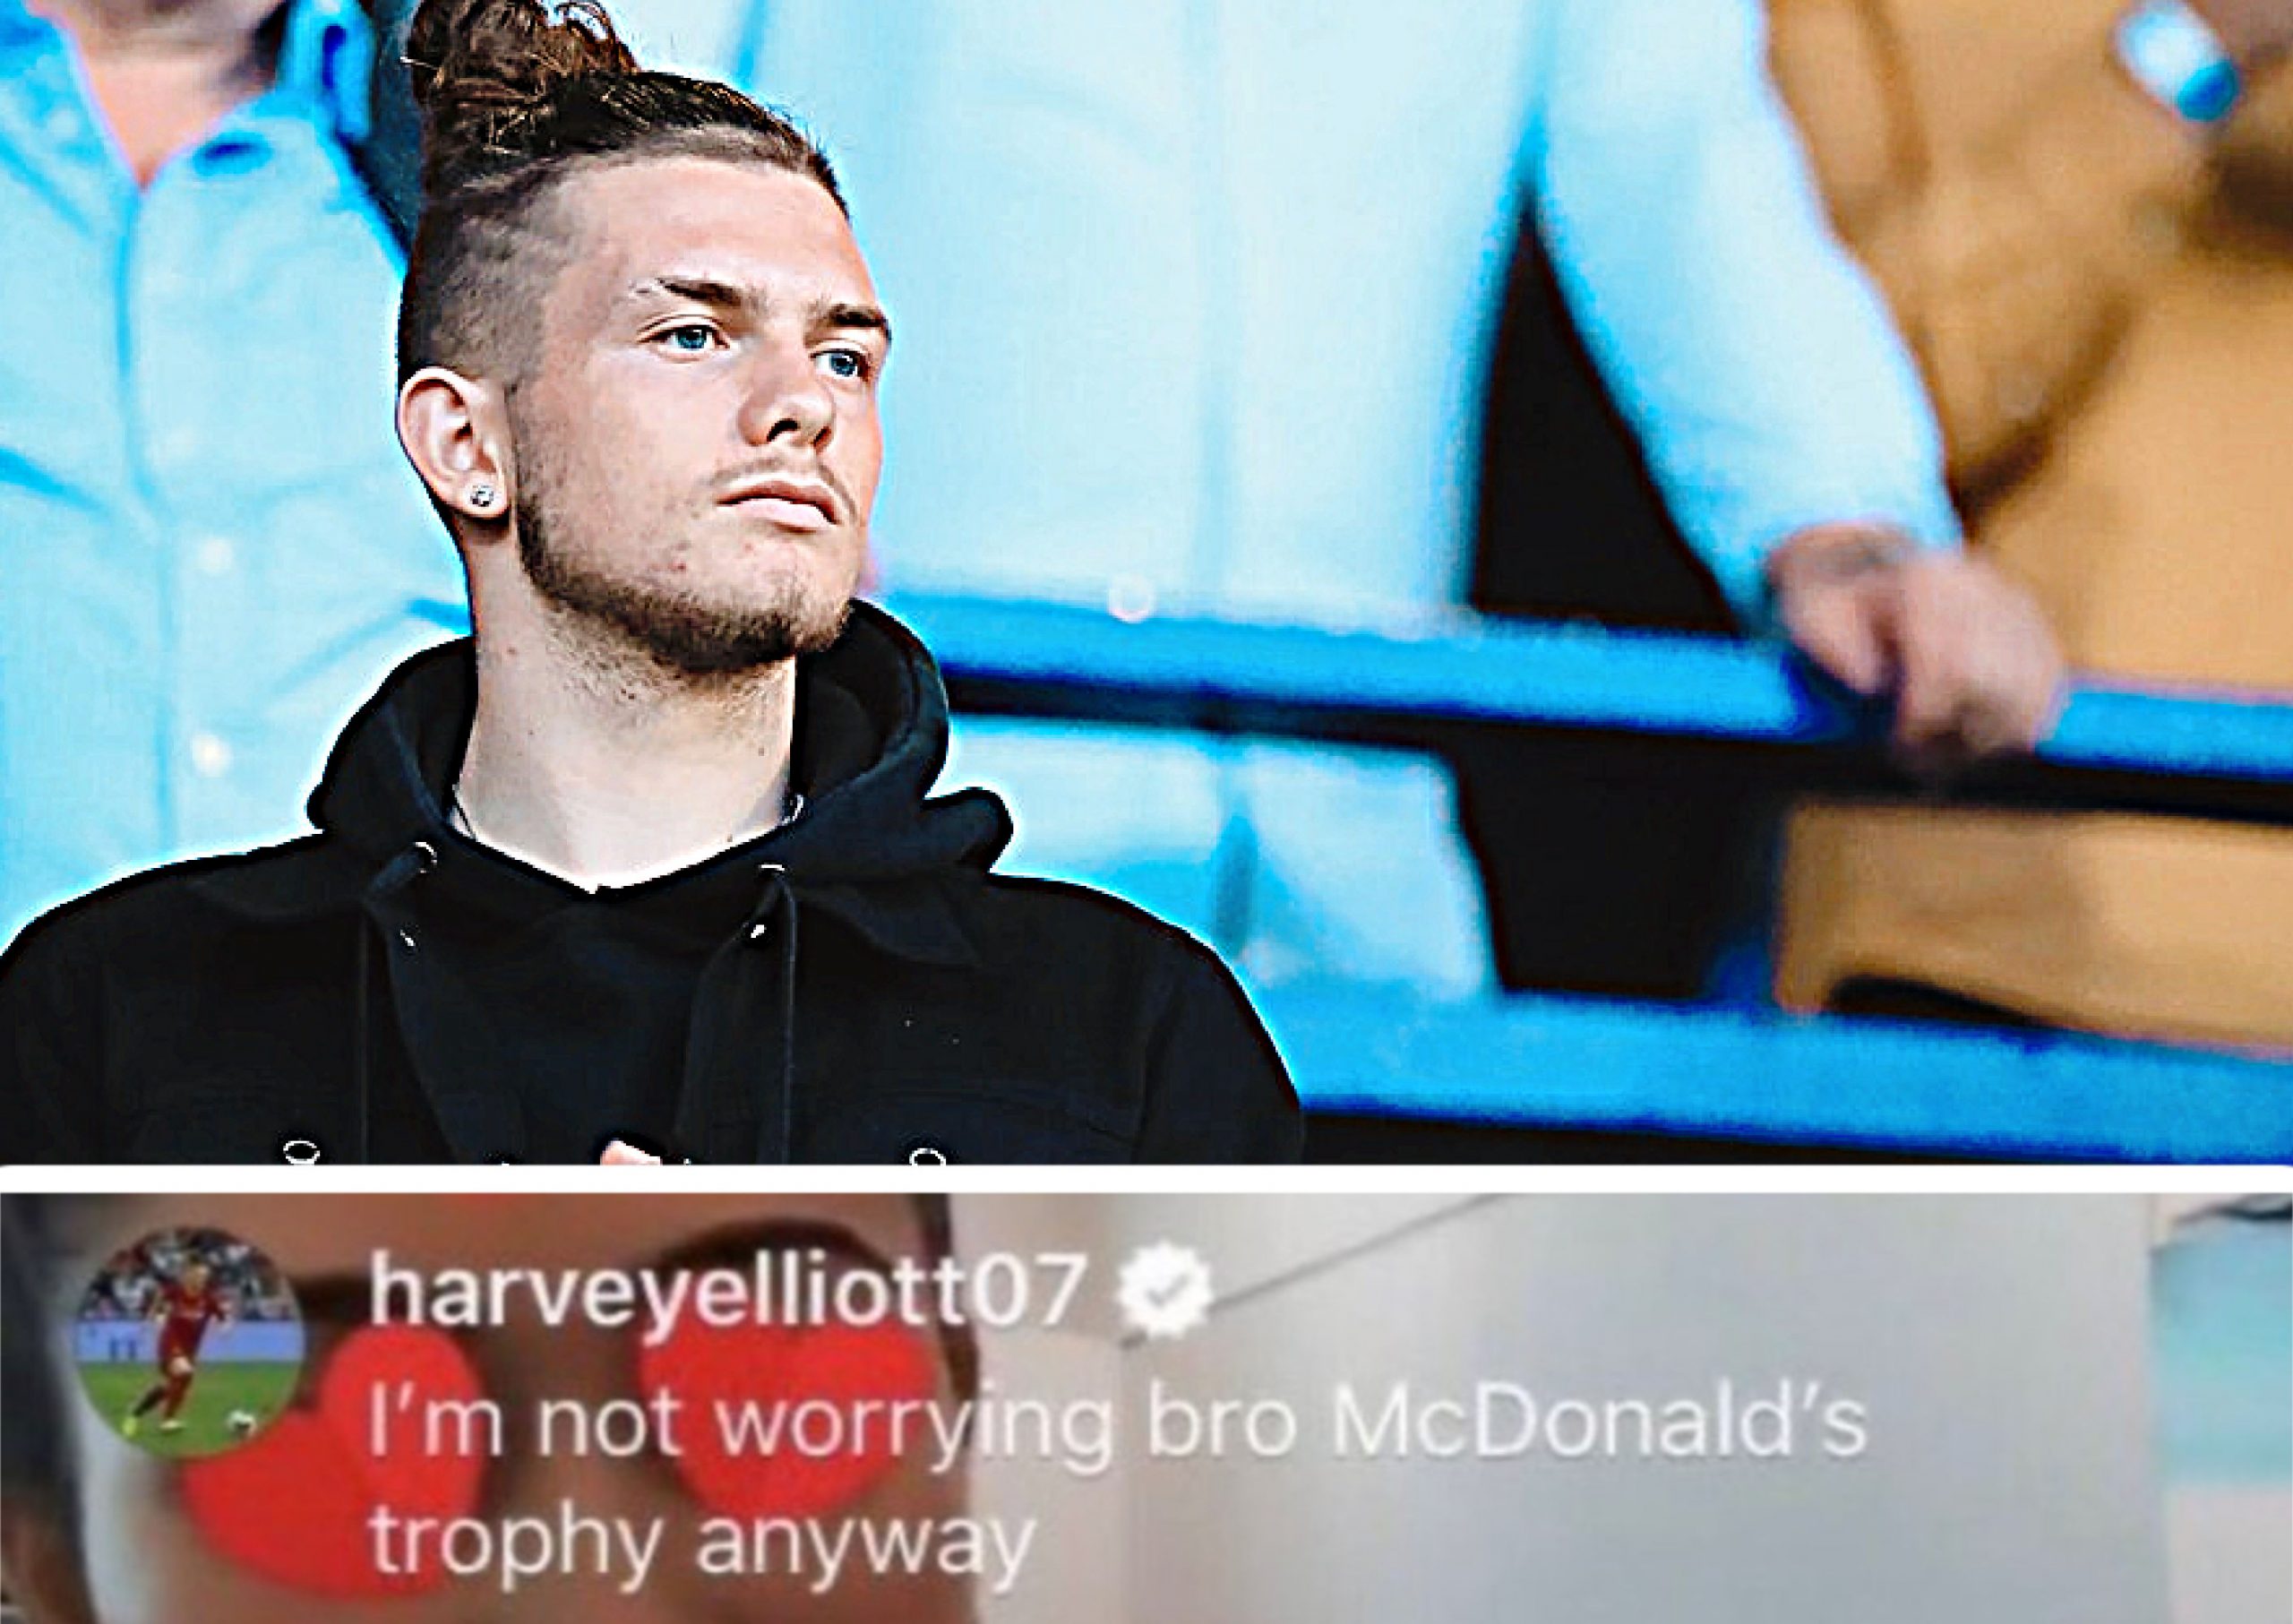 Rival fans spew literal hate as Harvey Elliott calls Community Shield a ‘McDonald’s trophy’ after Liverpool lose against Arsenal